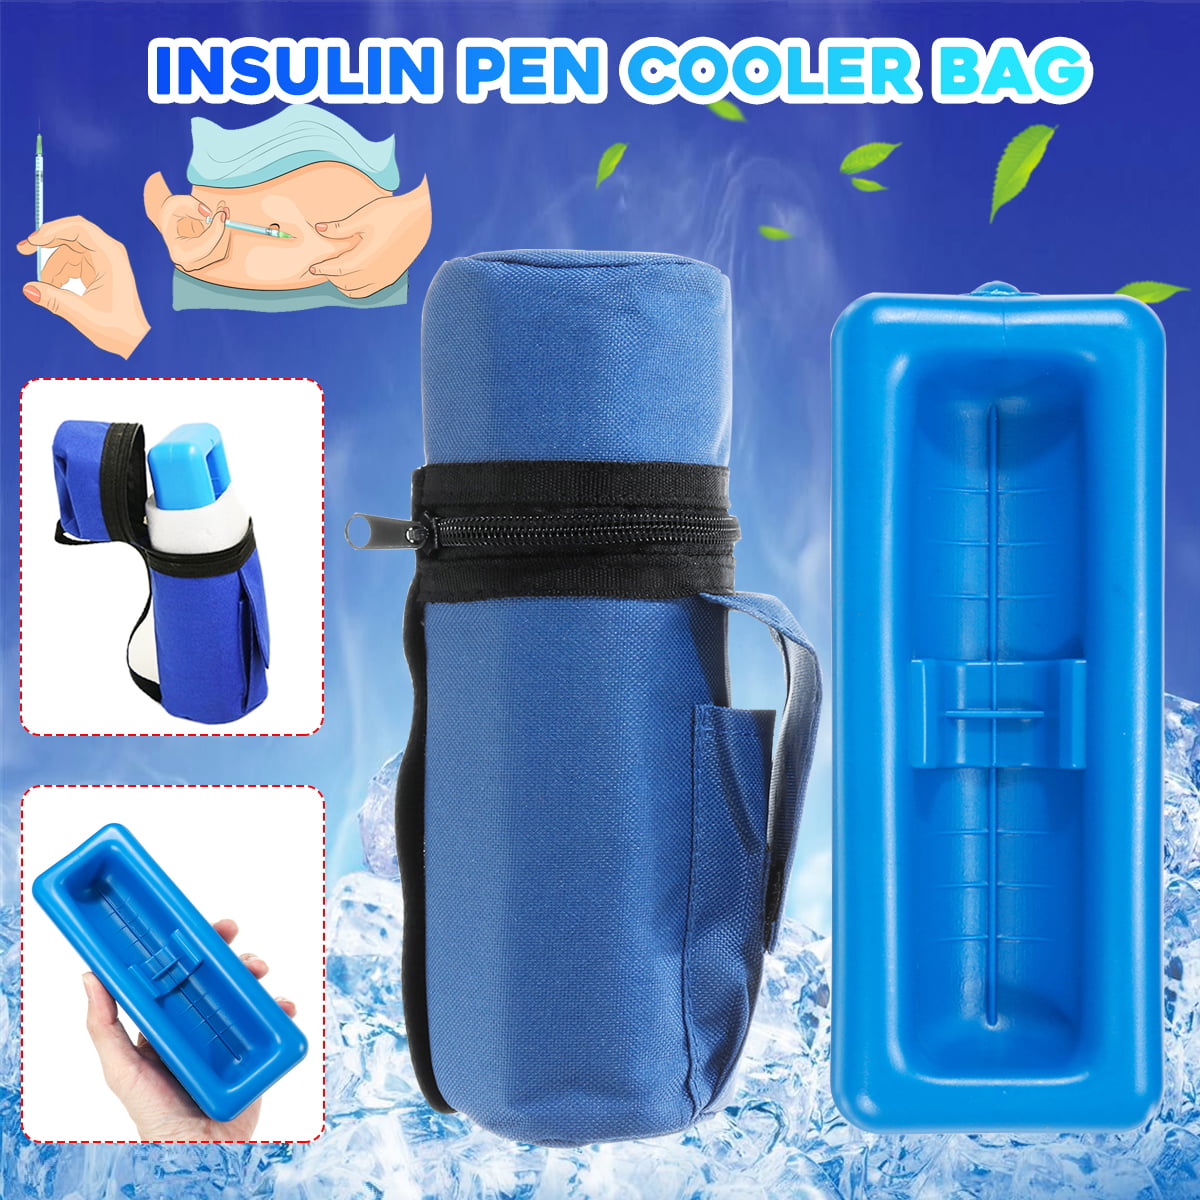 Outer Woods Insulated Insulin Cooler Bag wth Glucometer Slot